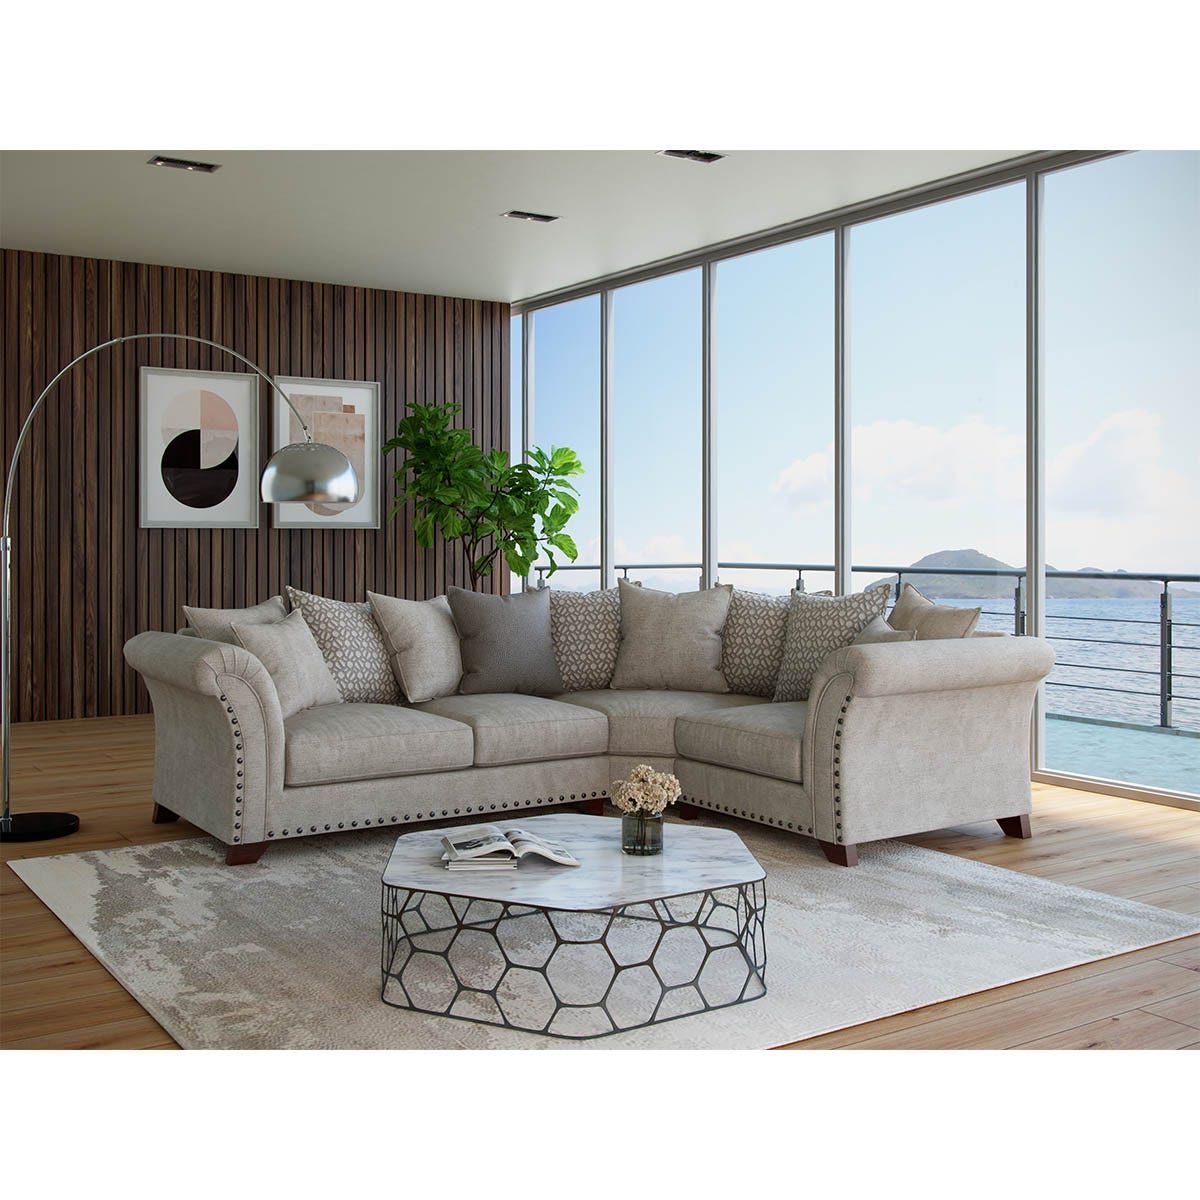 Chantelle 3 Seater And 2 Seater Sofa Set Silver Pillowback | Robert Dyas With Pillowback Sofa Sectionals (View 6 of 20)